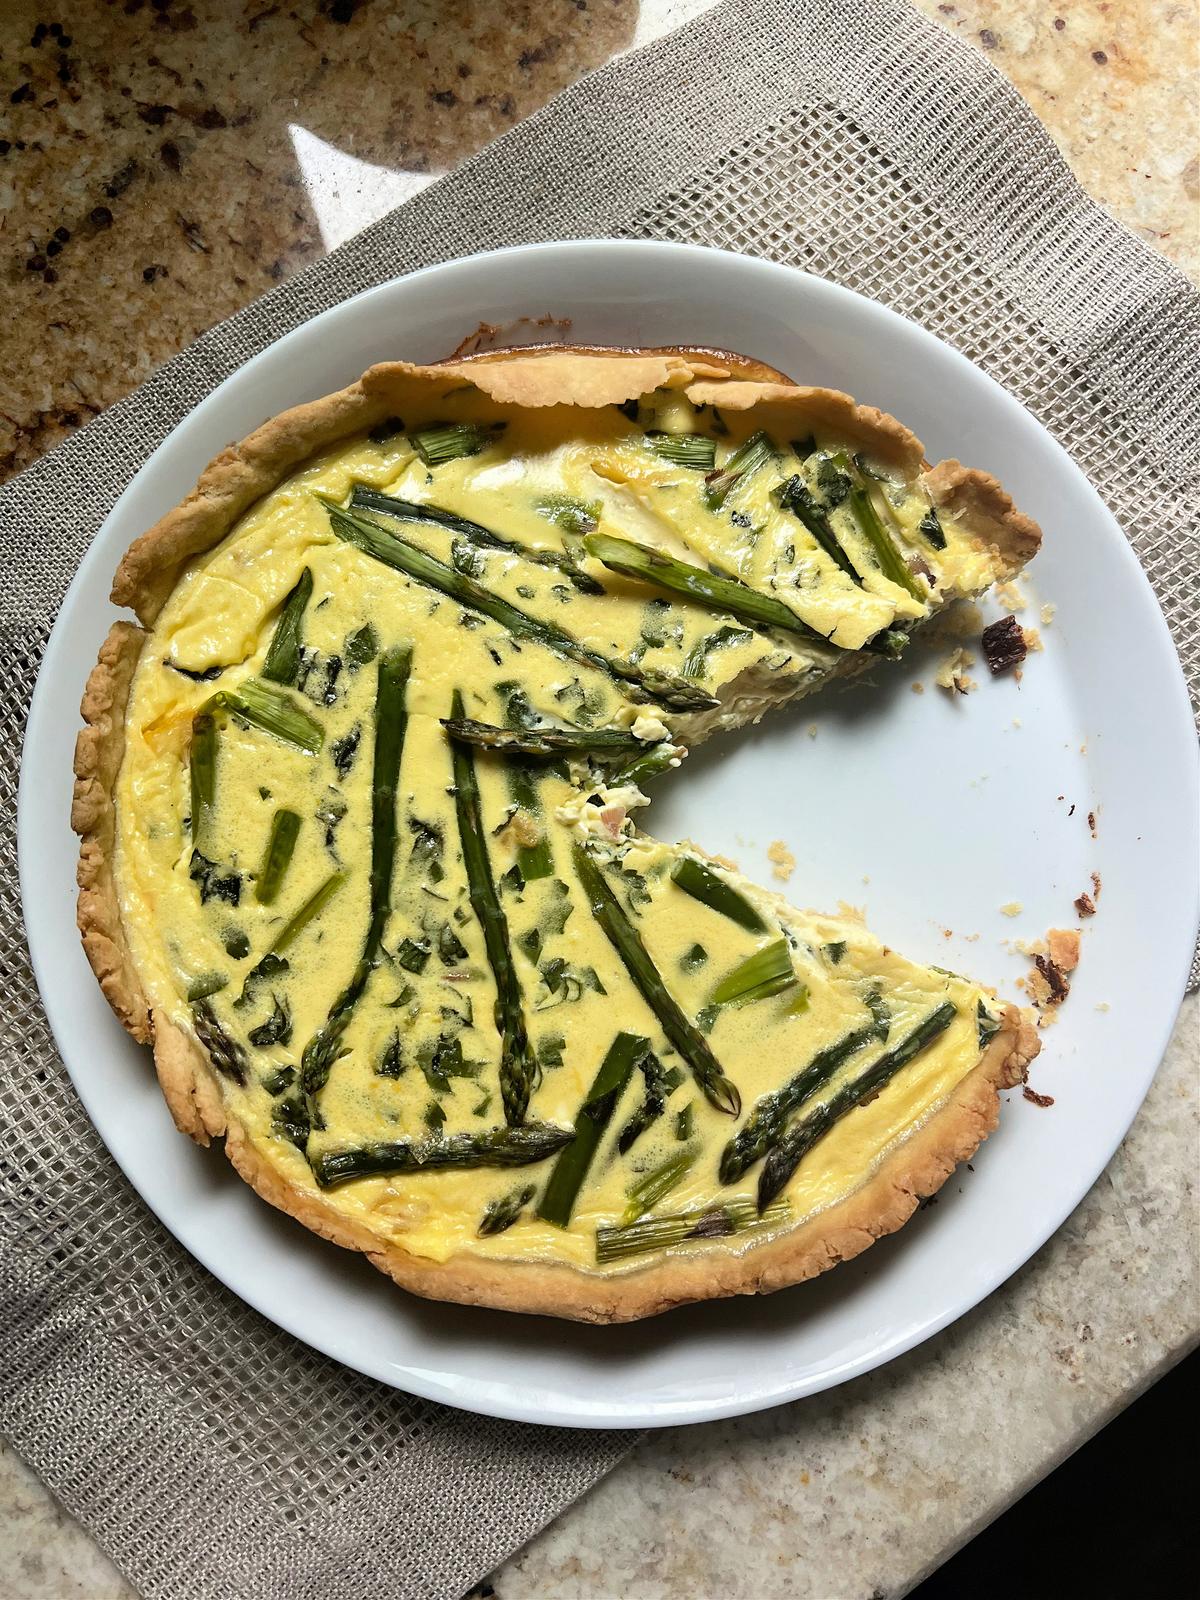 This light and airy quiche features one of spring's first vegetables, asparagus. (Gretchen McKay/Pittsburgh Post-Gazette/TNS)